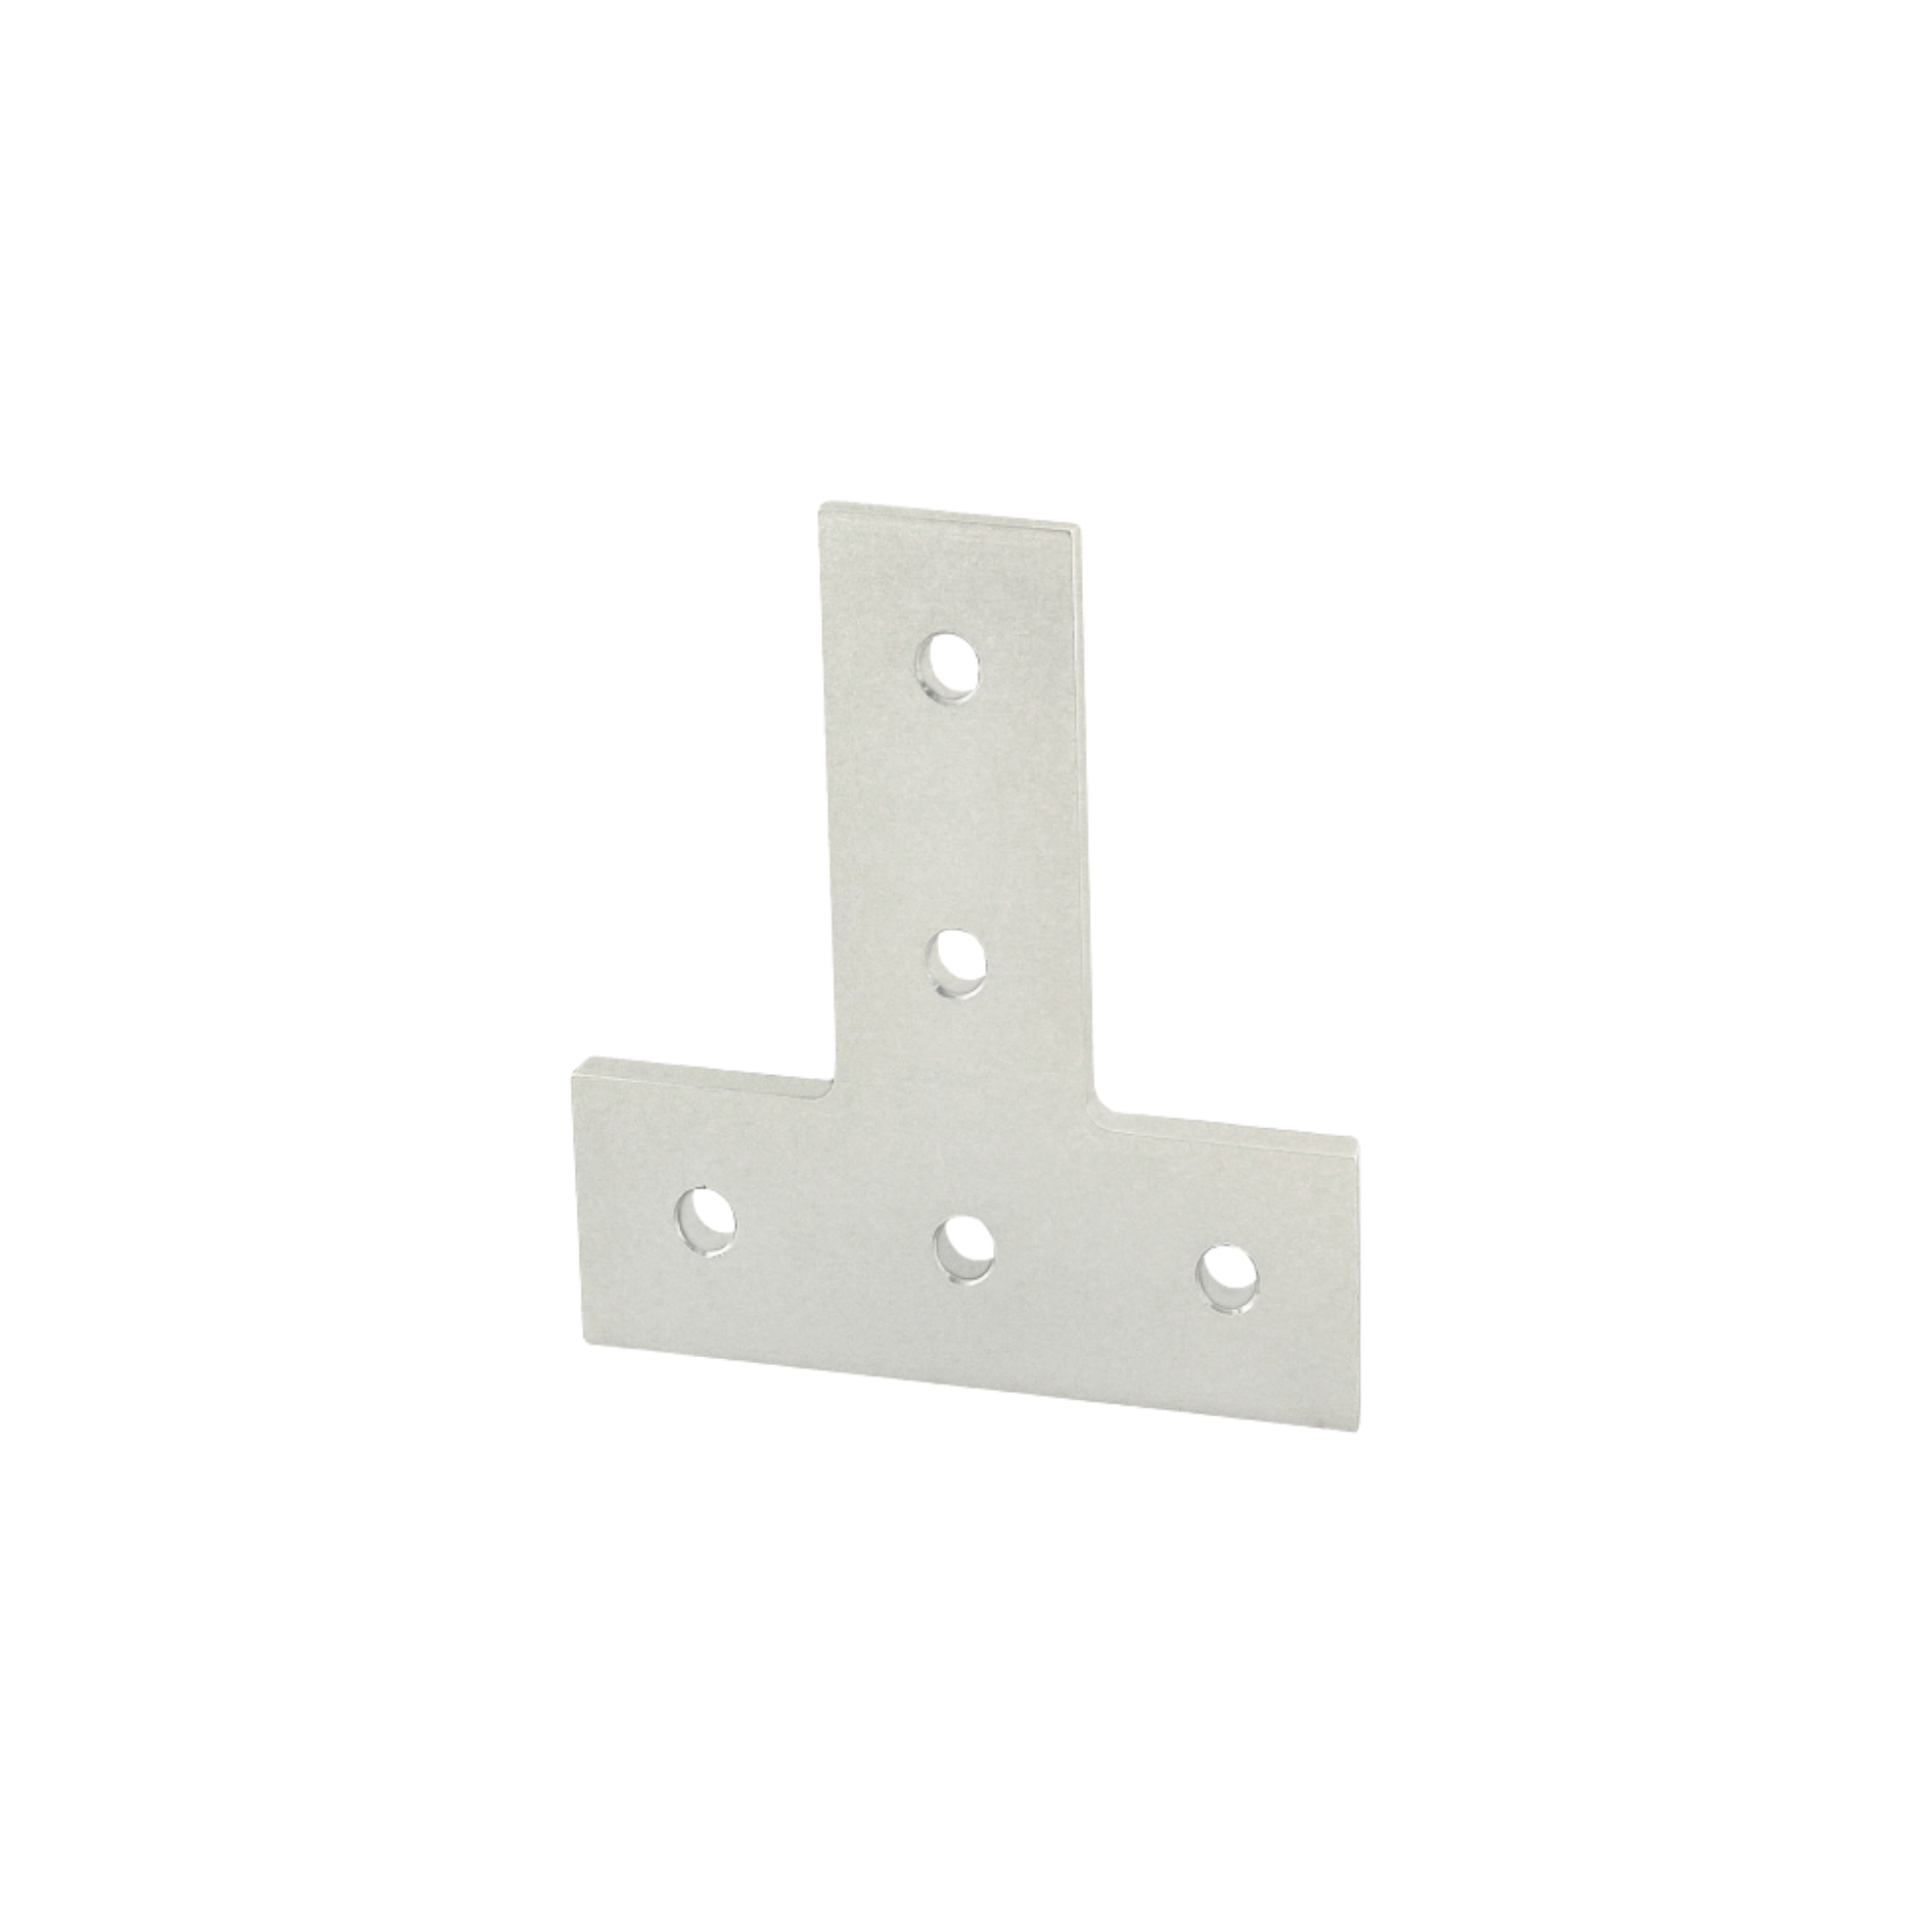 white T-plate positioned as an upside down T, with five mounting holes